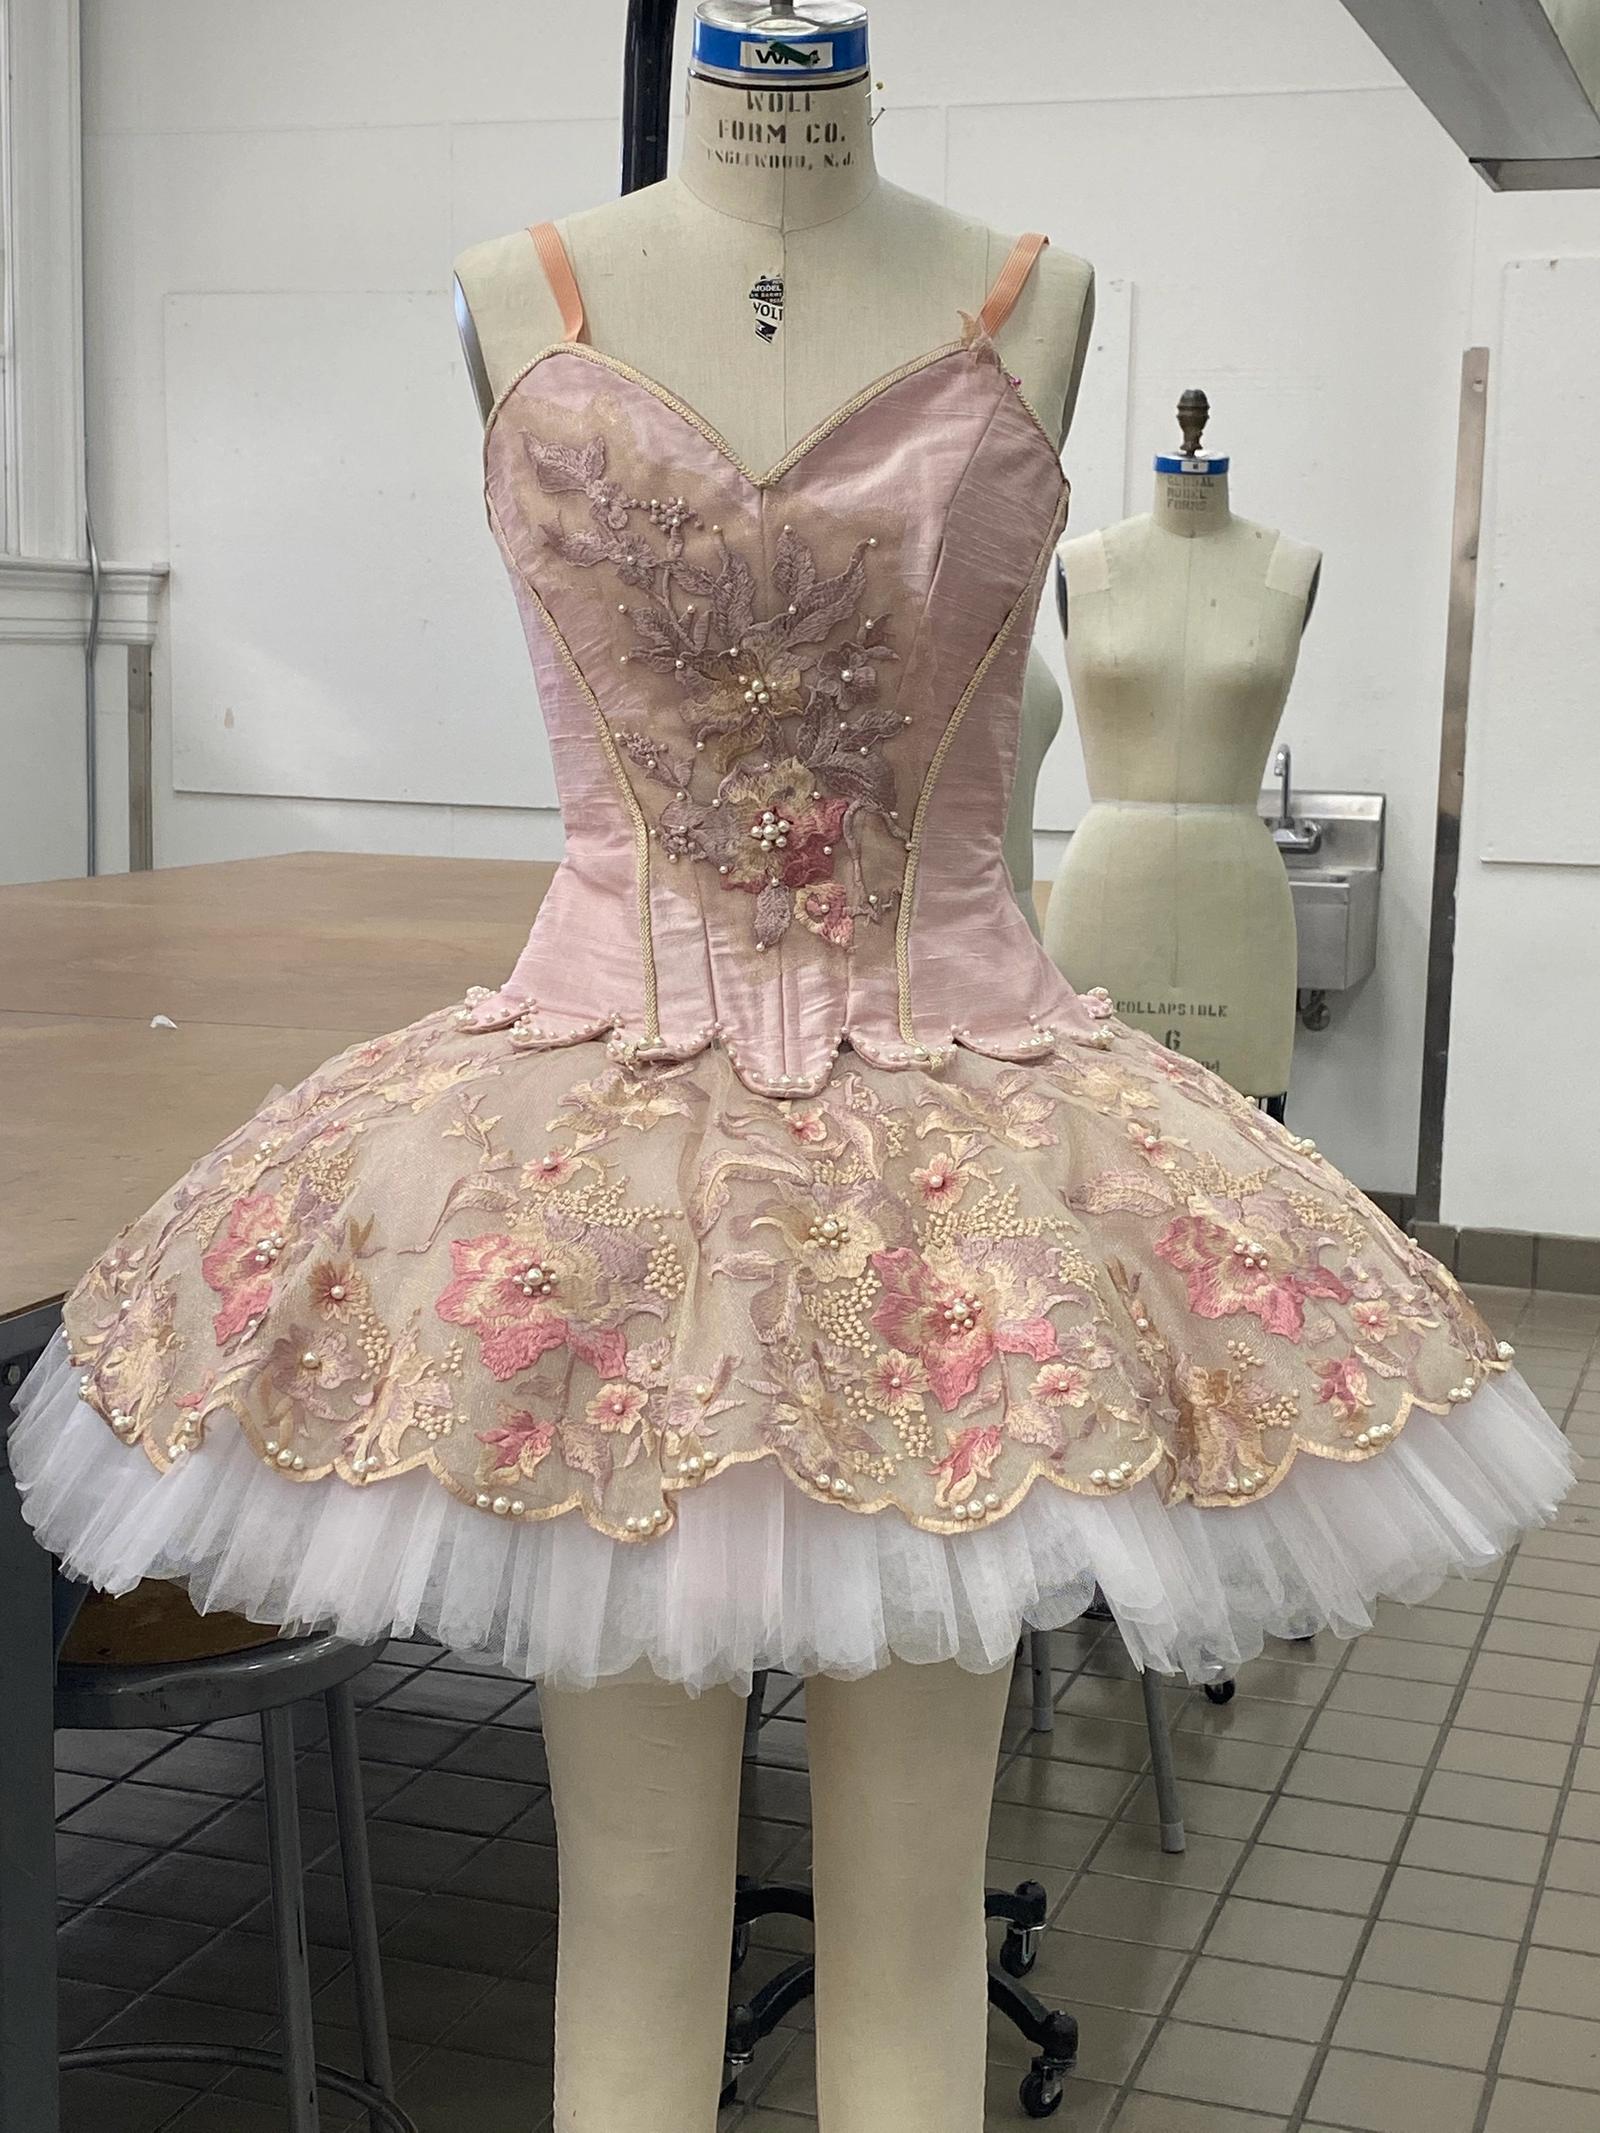 Complete classical tutu made up of corseted bodice, tutu skirt, basque, and knickers.